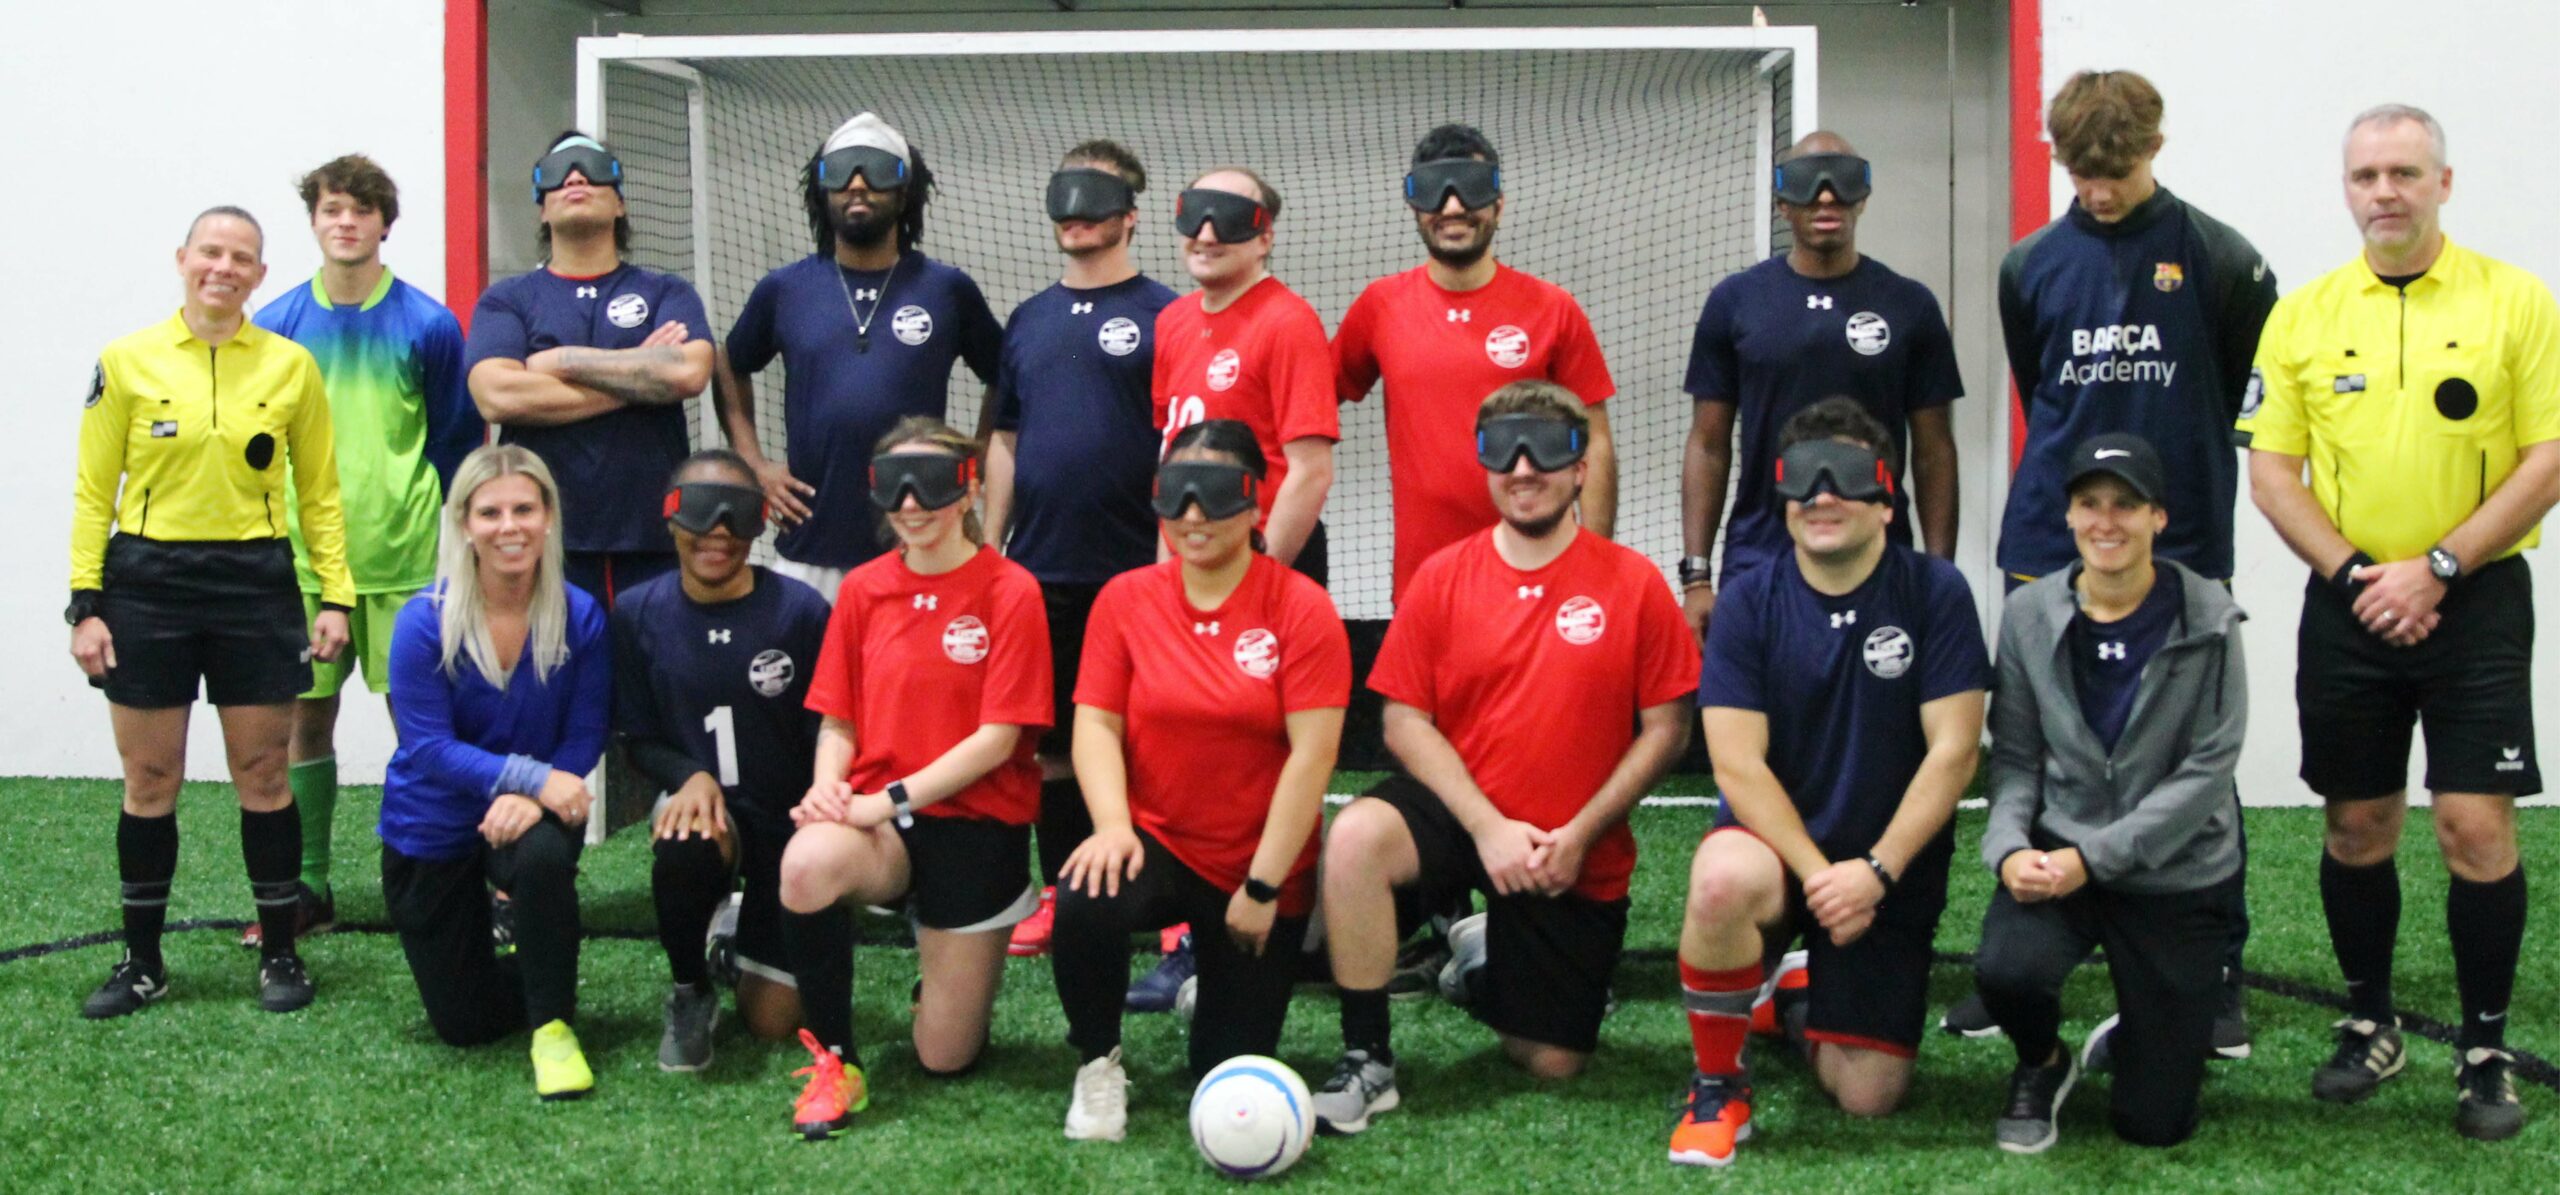 Katie Smith posing with blind soccer team in front of goal